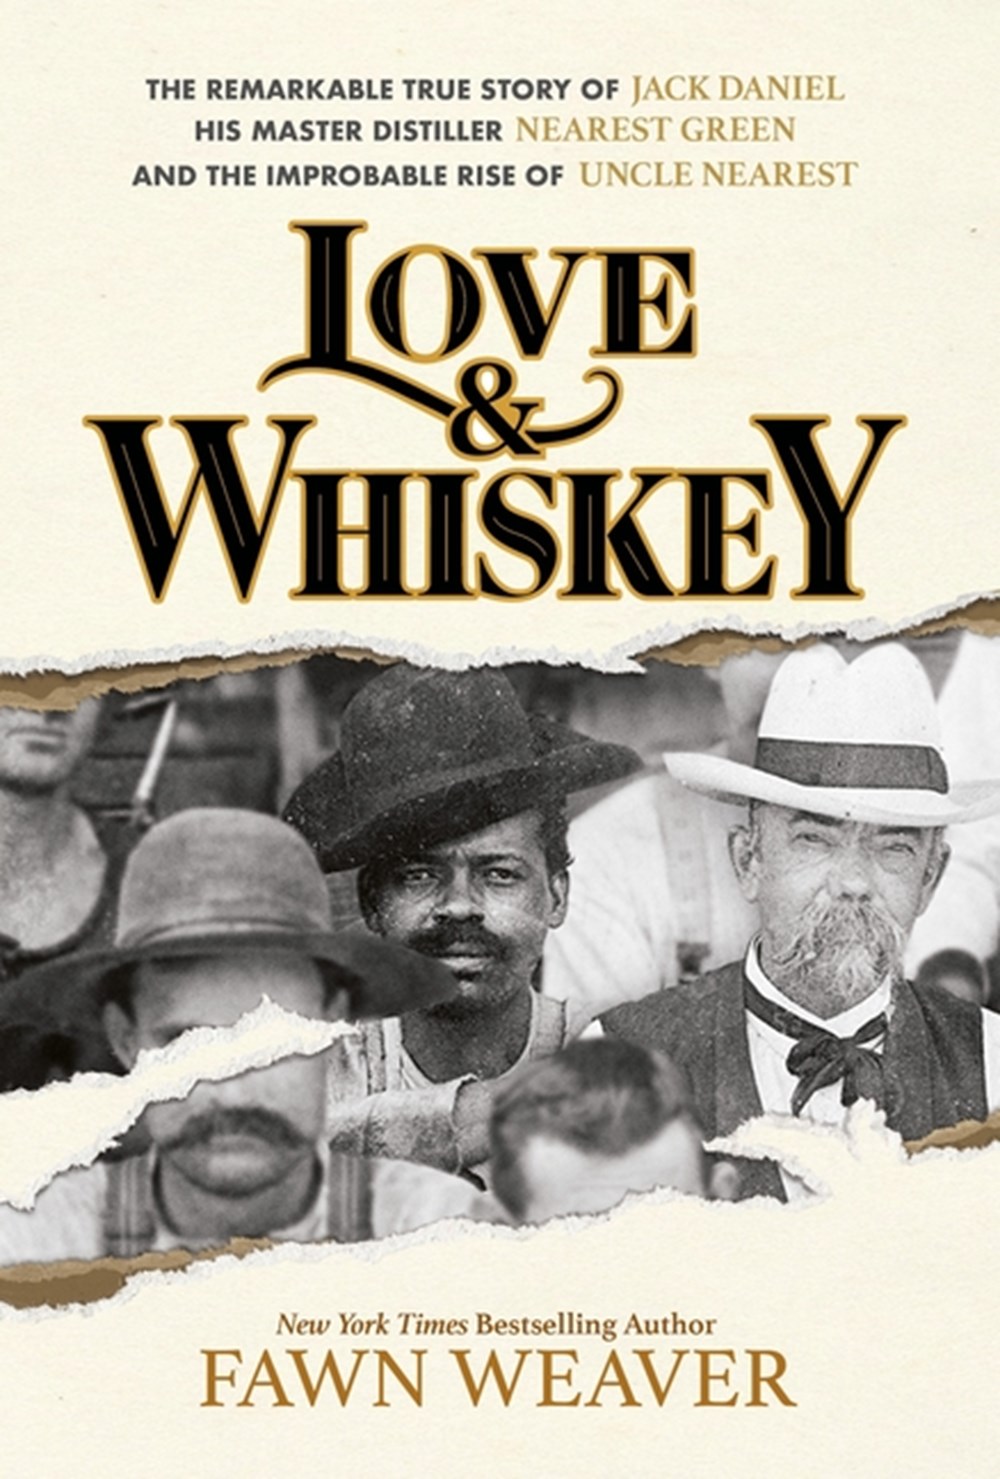 Love & Whiskey: The Remarkable True Story of Jack Daniel, His Master Distiller Nearest Green, and th